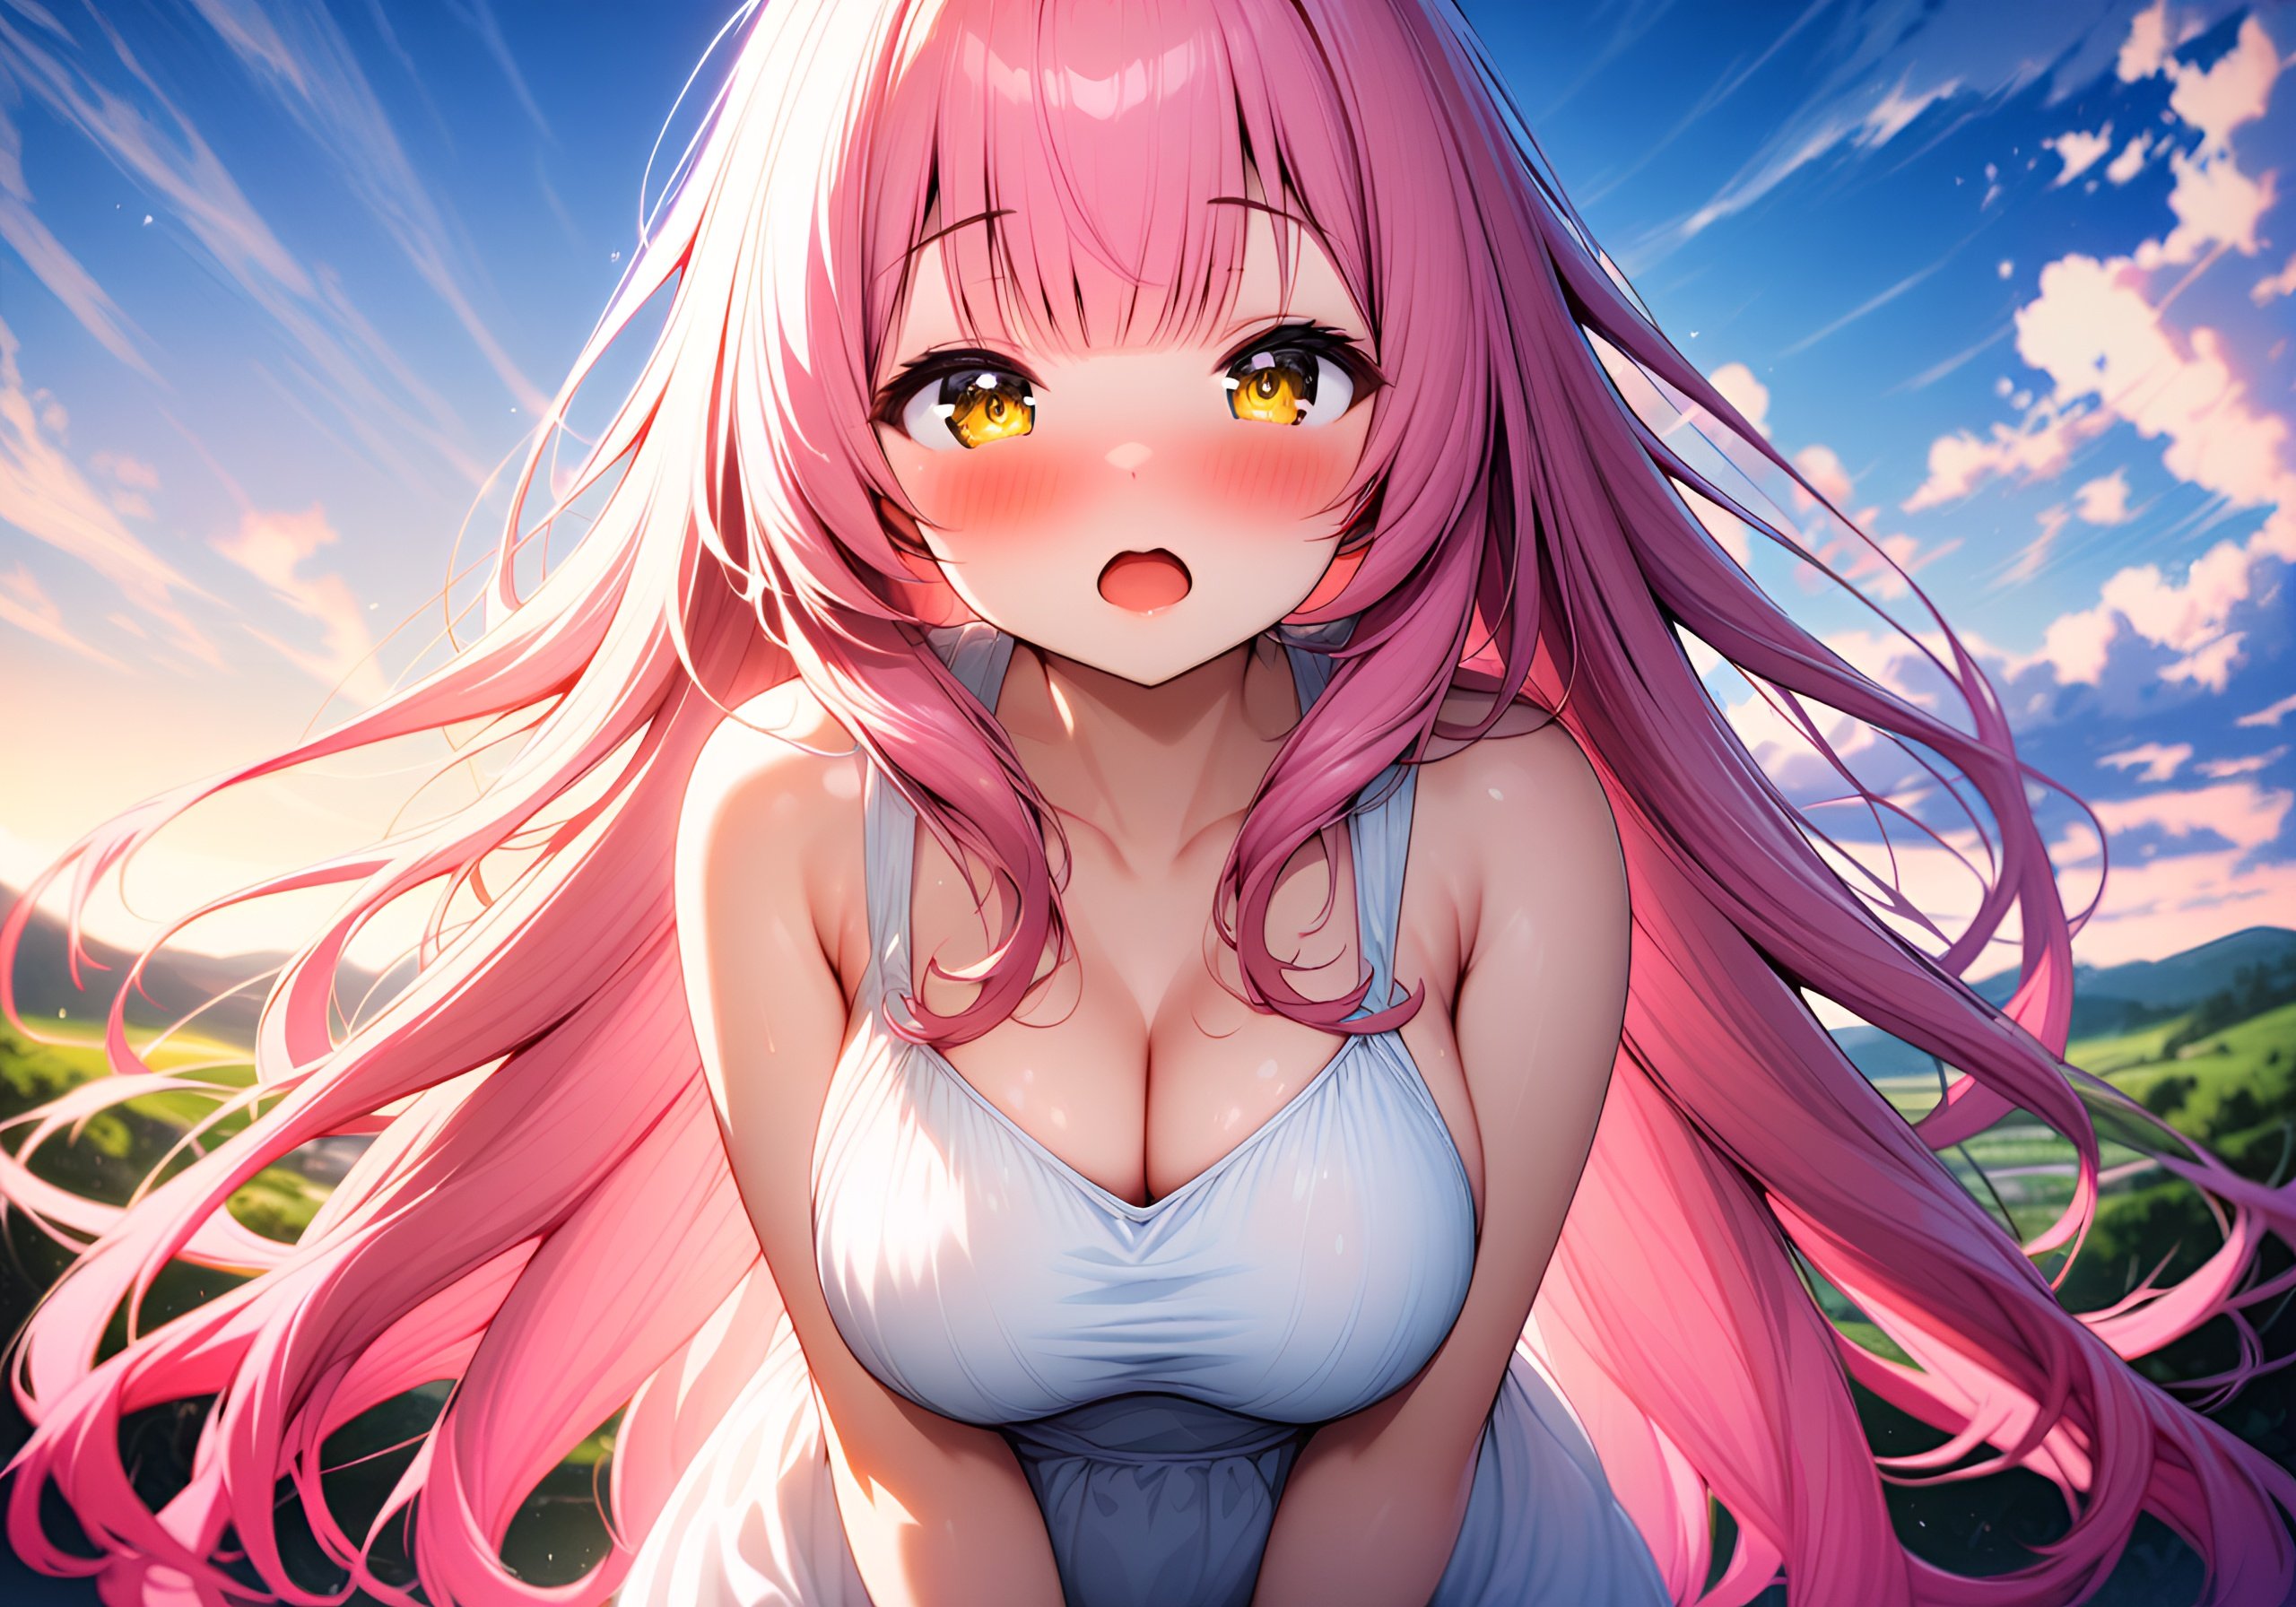 Image of 1girl, very long hair, pink hair, bangs, white sundress, yellow eyes, large chest size, cute, sfw, looking at viewer, open mouth, blush, blue sky, lighting coming from the front, hd, soft lighting, landscape, solo